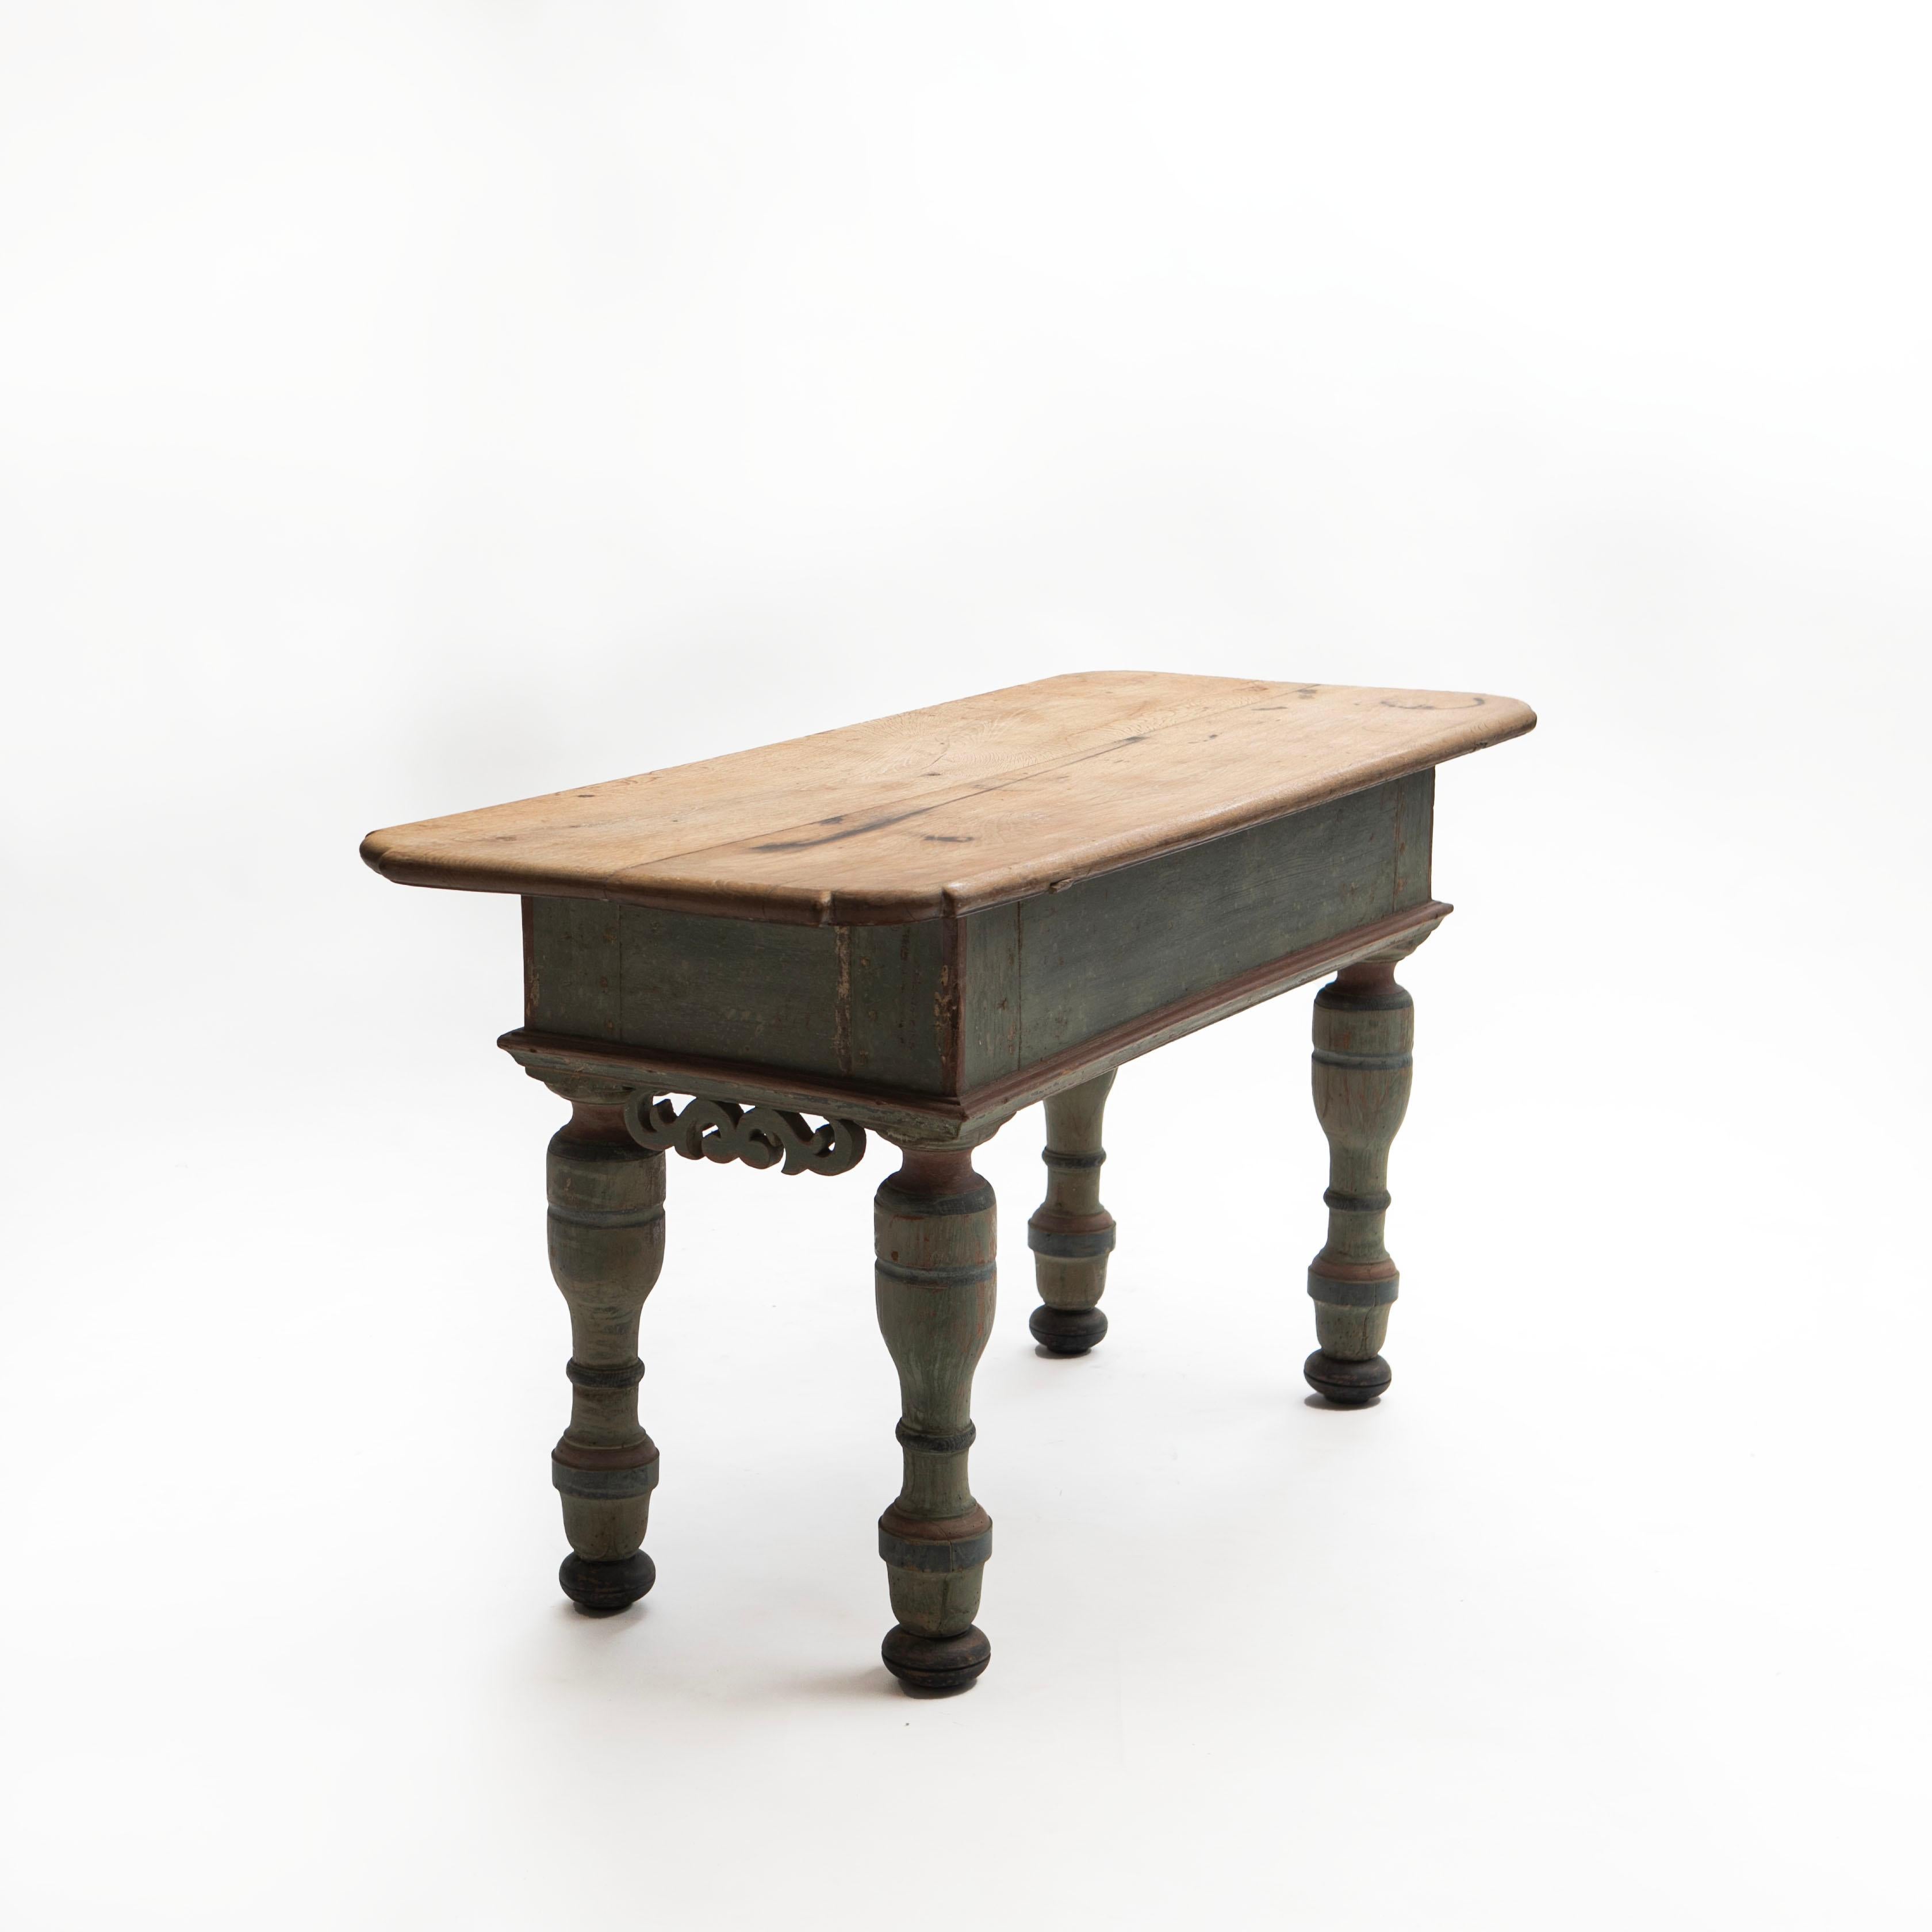 Danish 18th Century Baroque Table With Two Drawers and Original Paint In Good Condition For Sale In Kastrup, DK